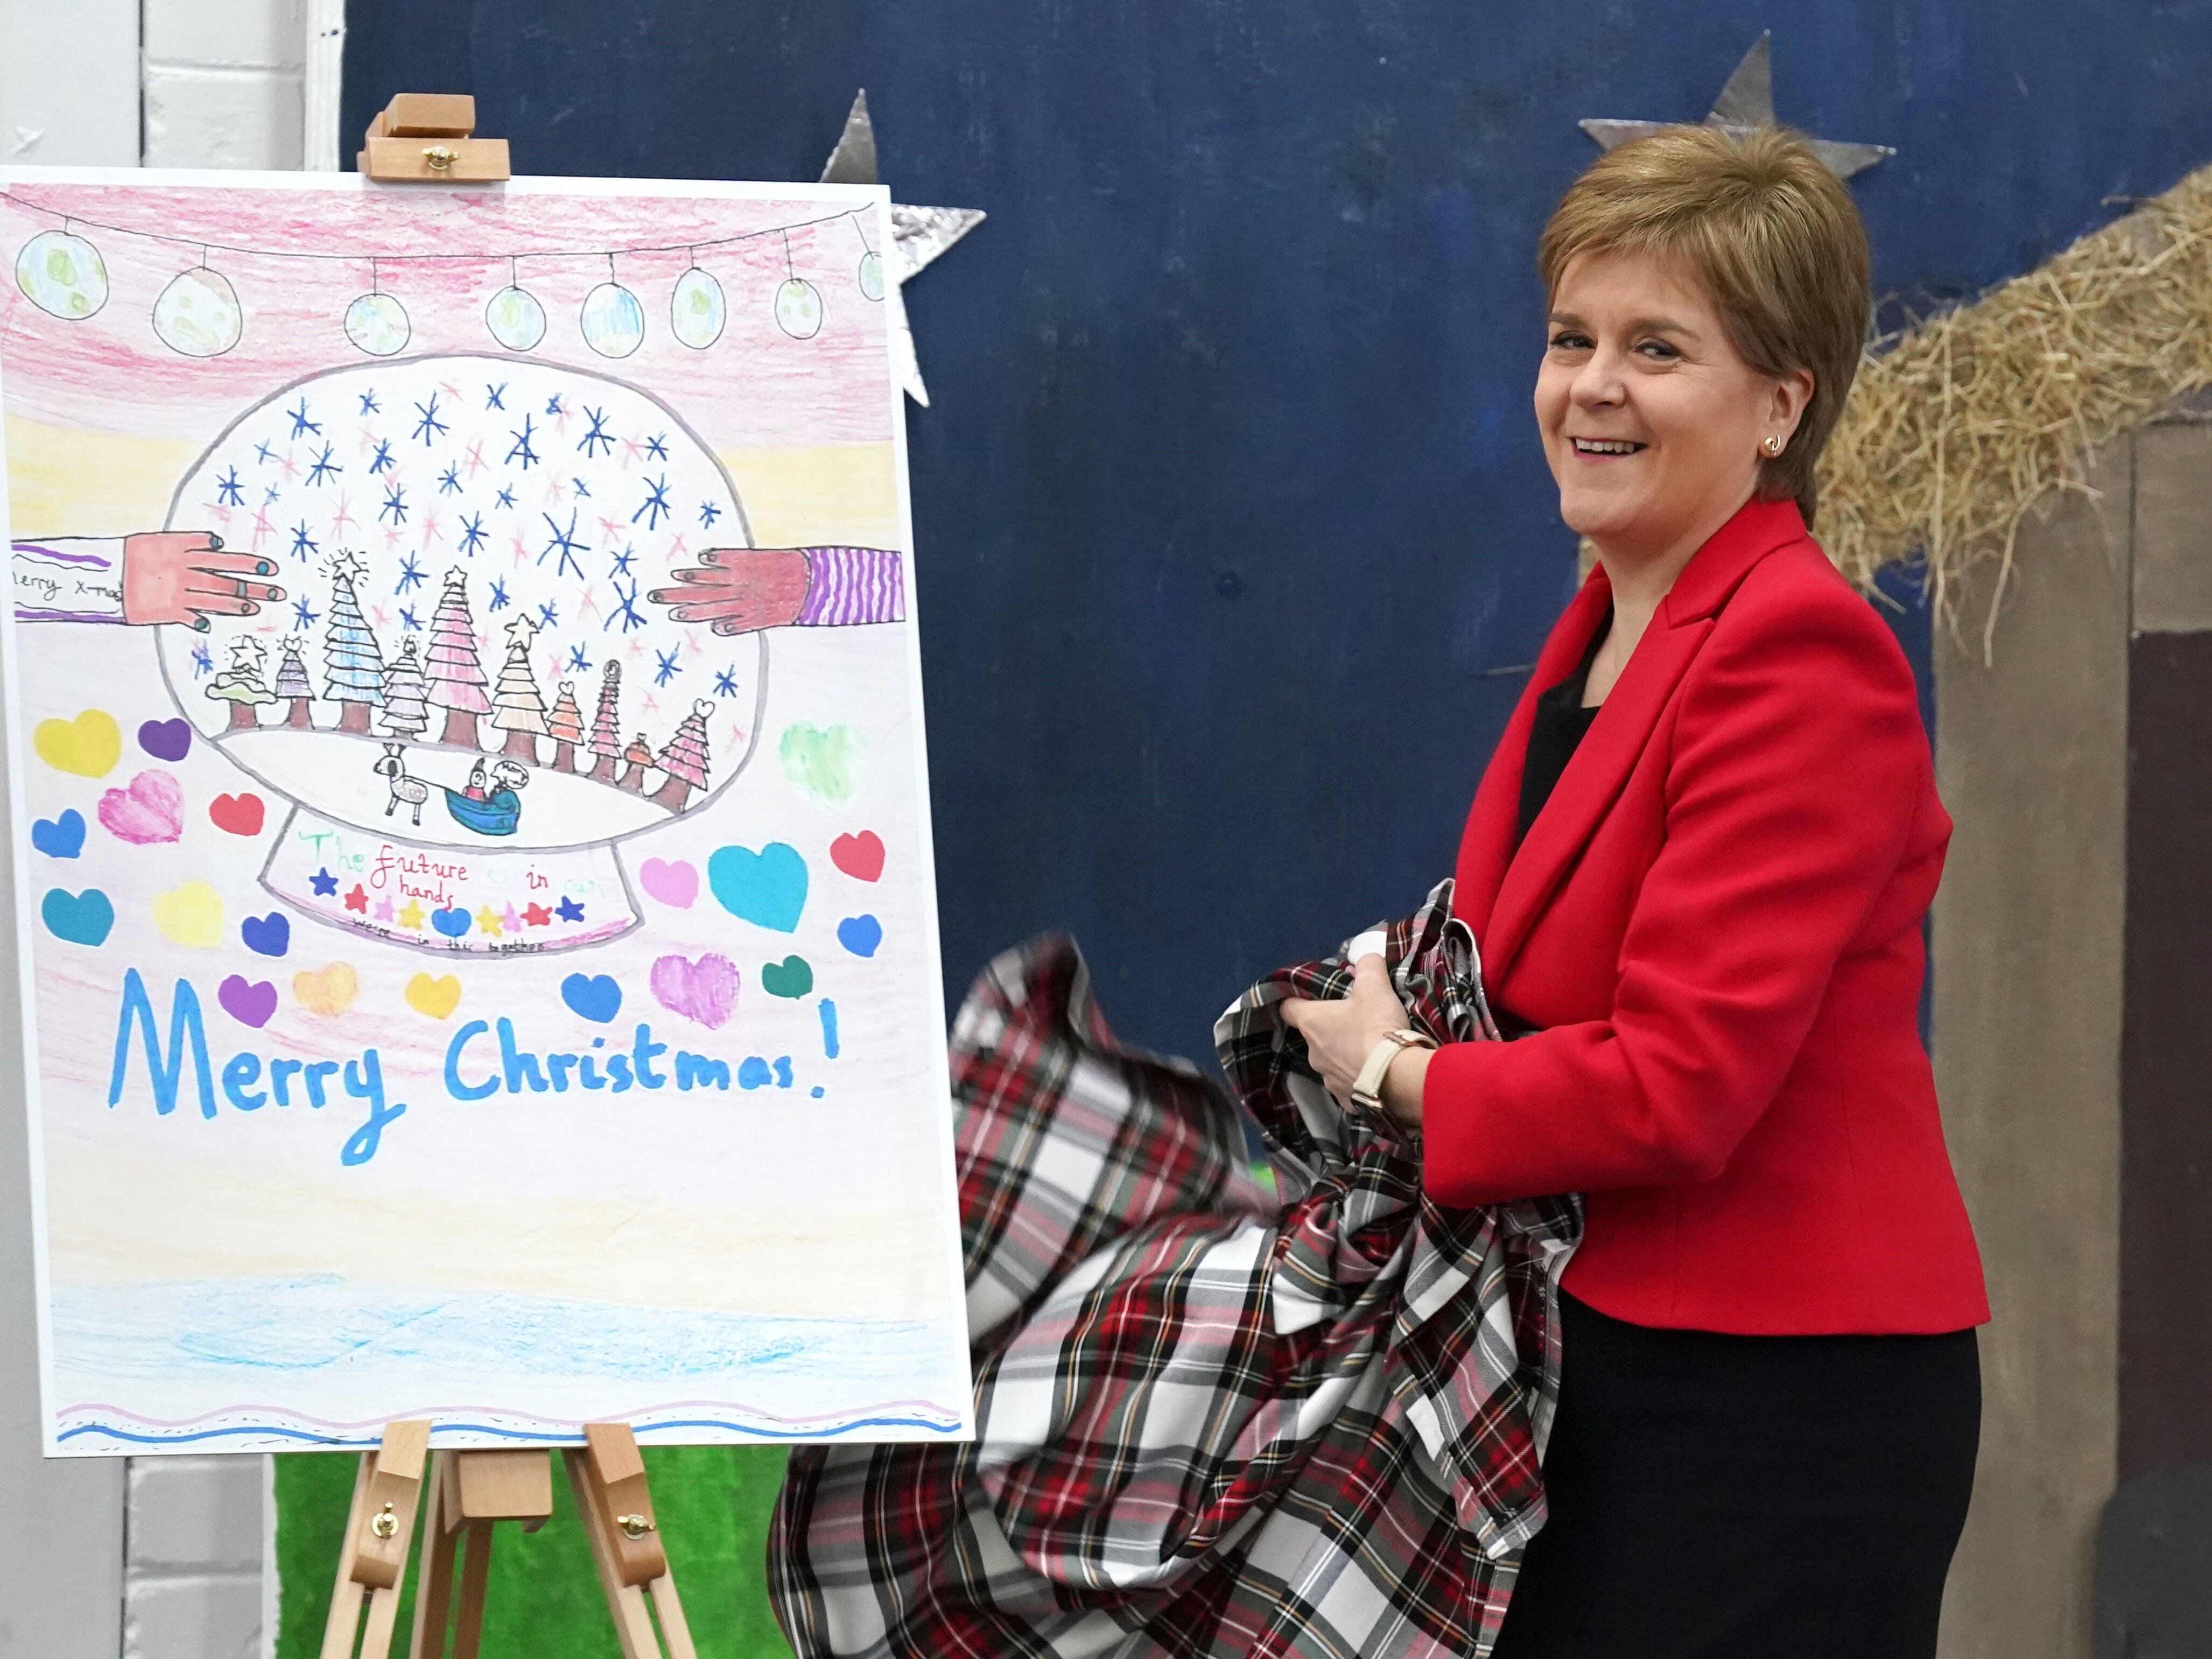 Nicola Sturgeon unveils her official Christmas card designed by school pupil